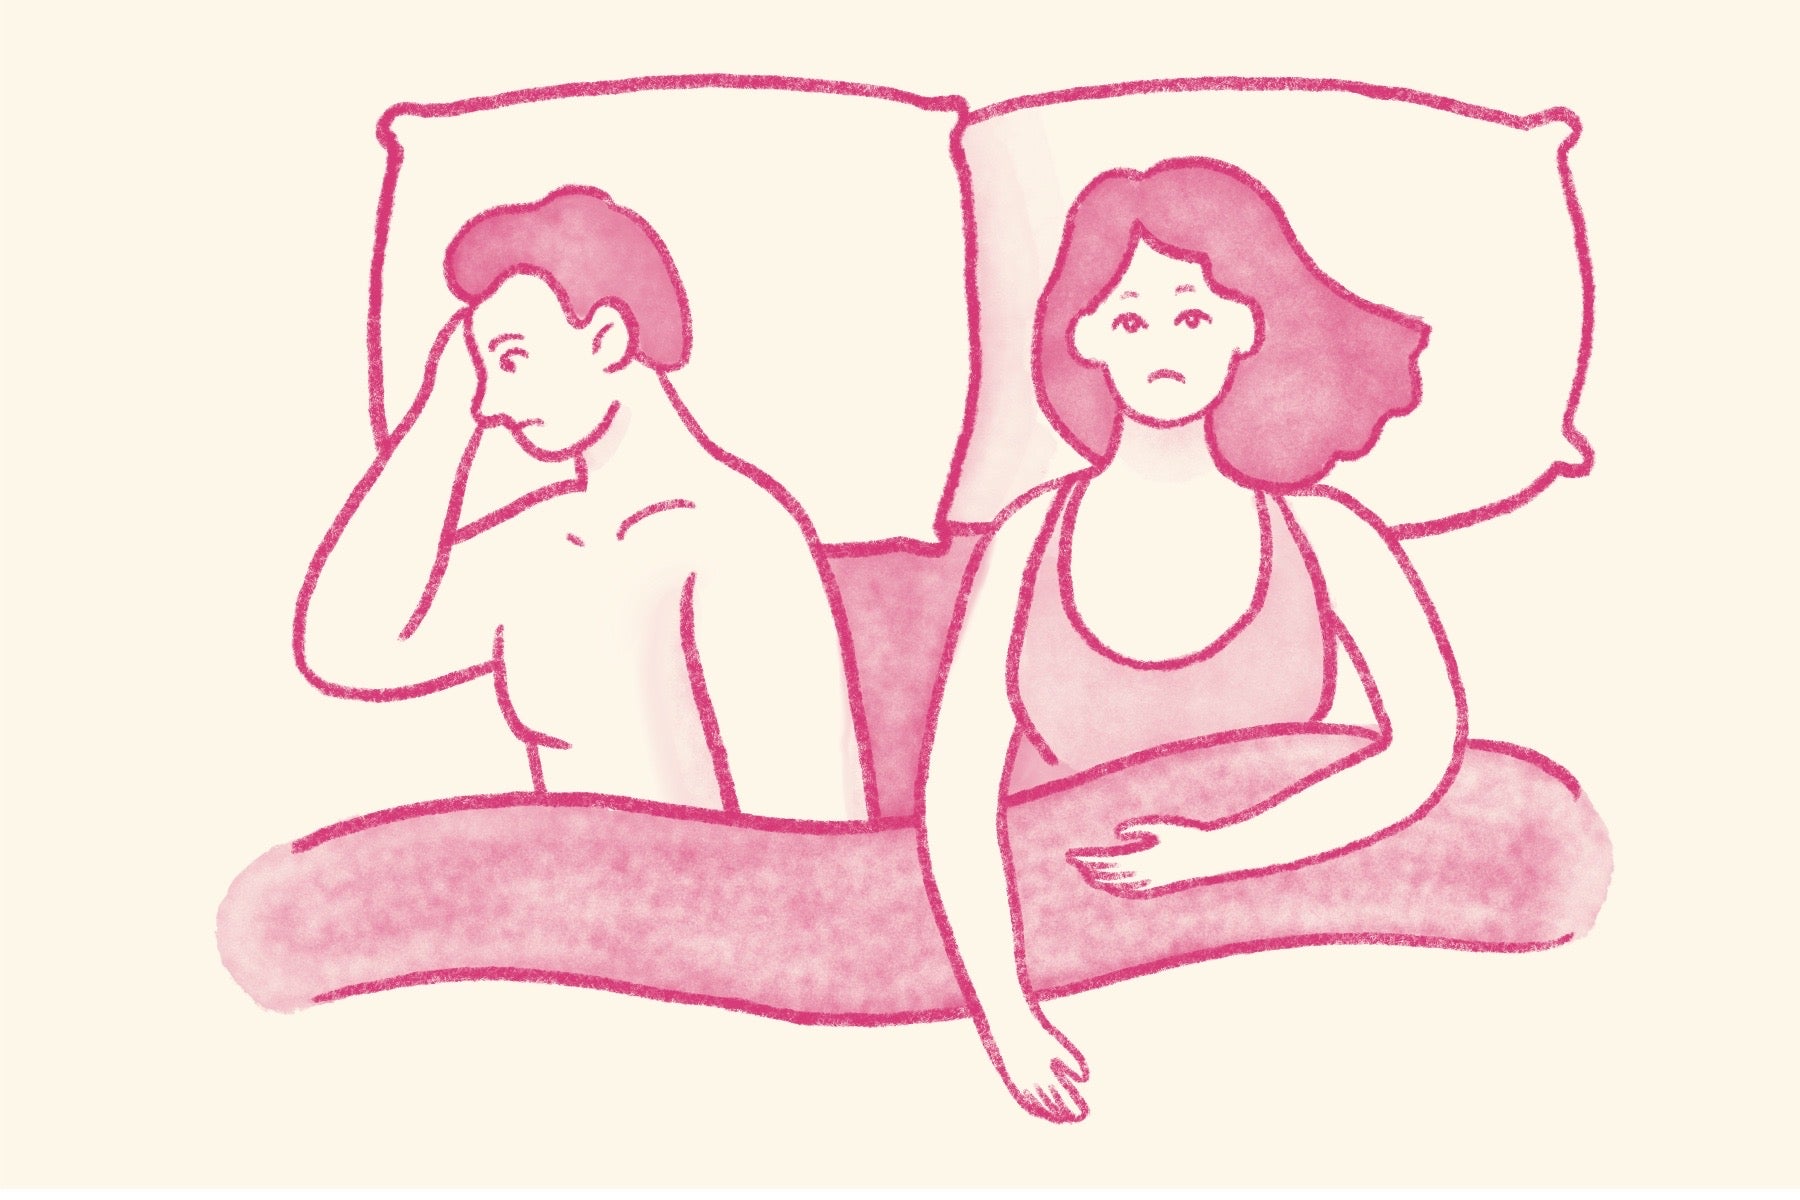 Breakup Sex: A Post-Mortem for the Good, the Bad, and the Palatable Truth